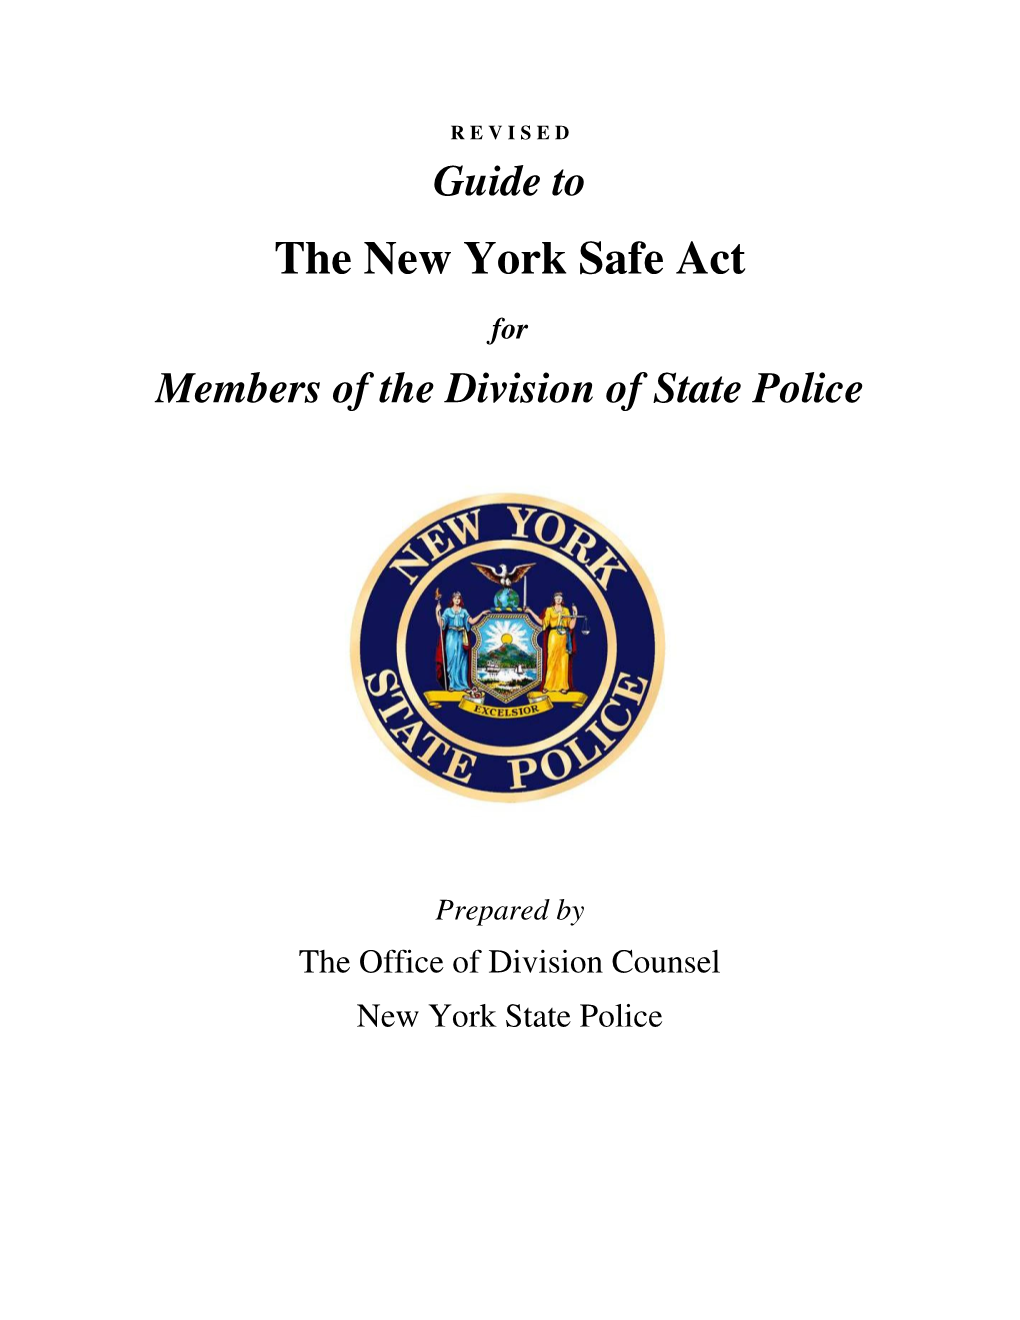 New York State Police Guide to the SAFE